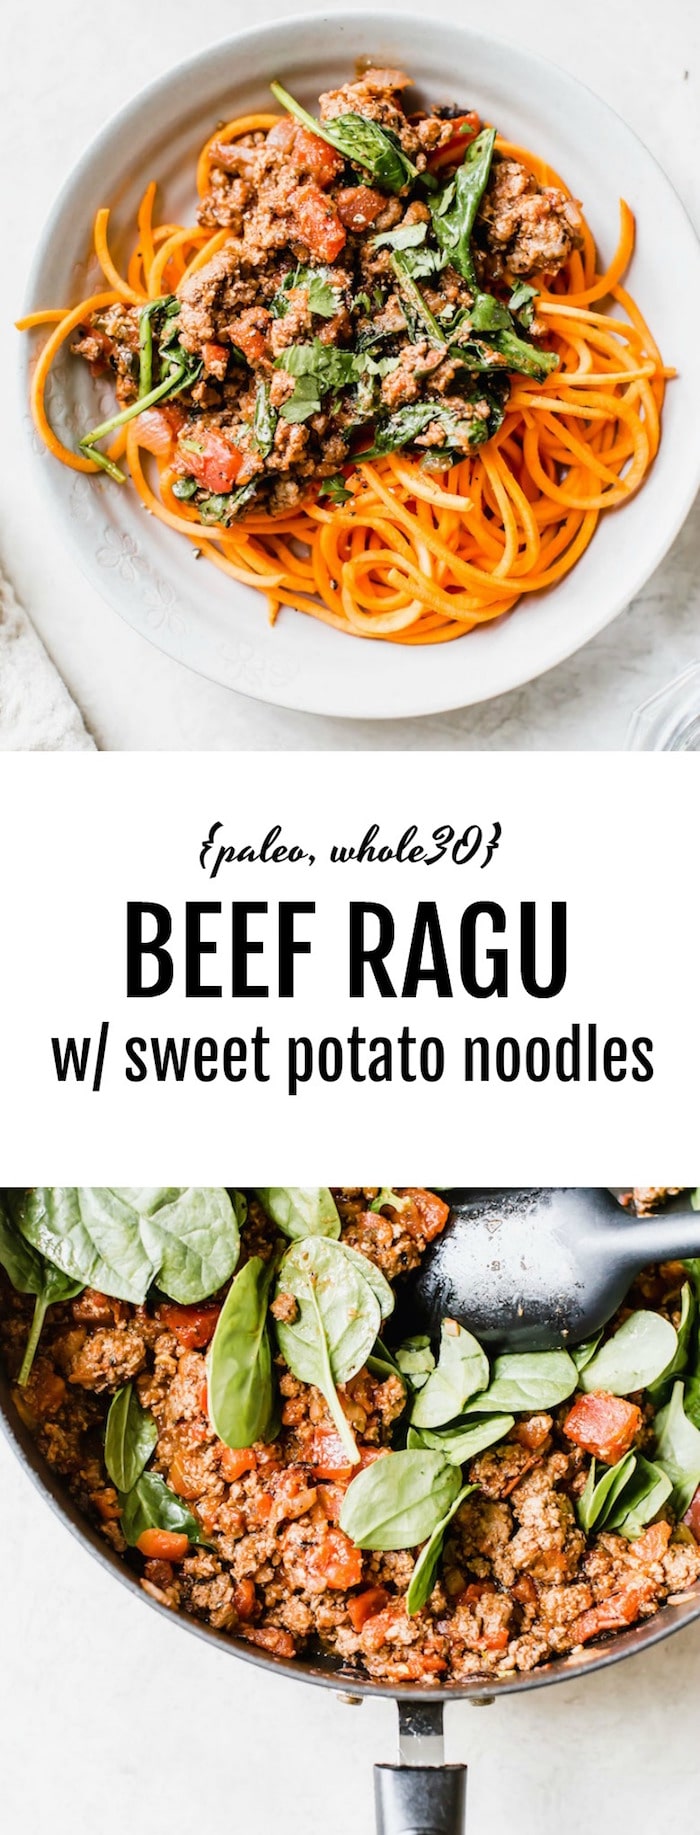 Beef Ragu with Sweet Potato Noodles -- a whole30 compliant meal that's ready in 20 minutes! | thealmondeater.com